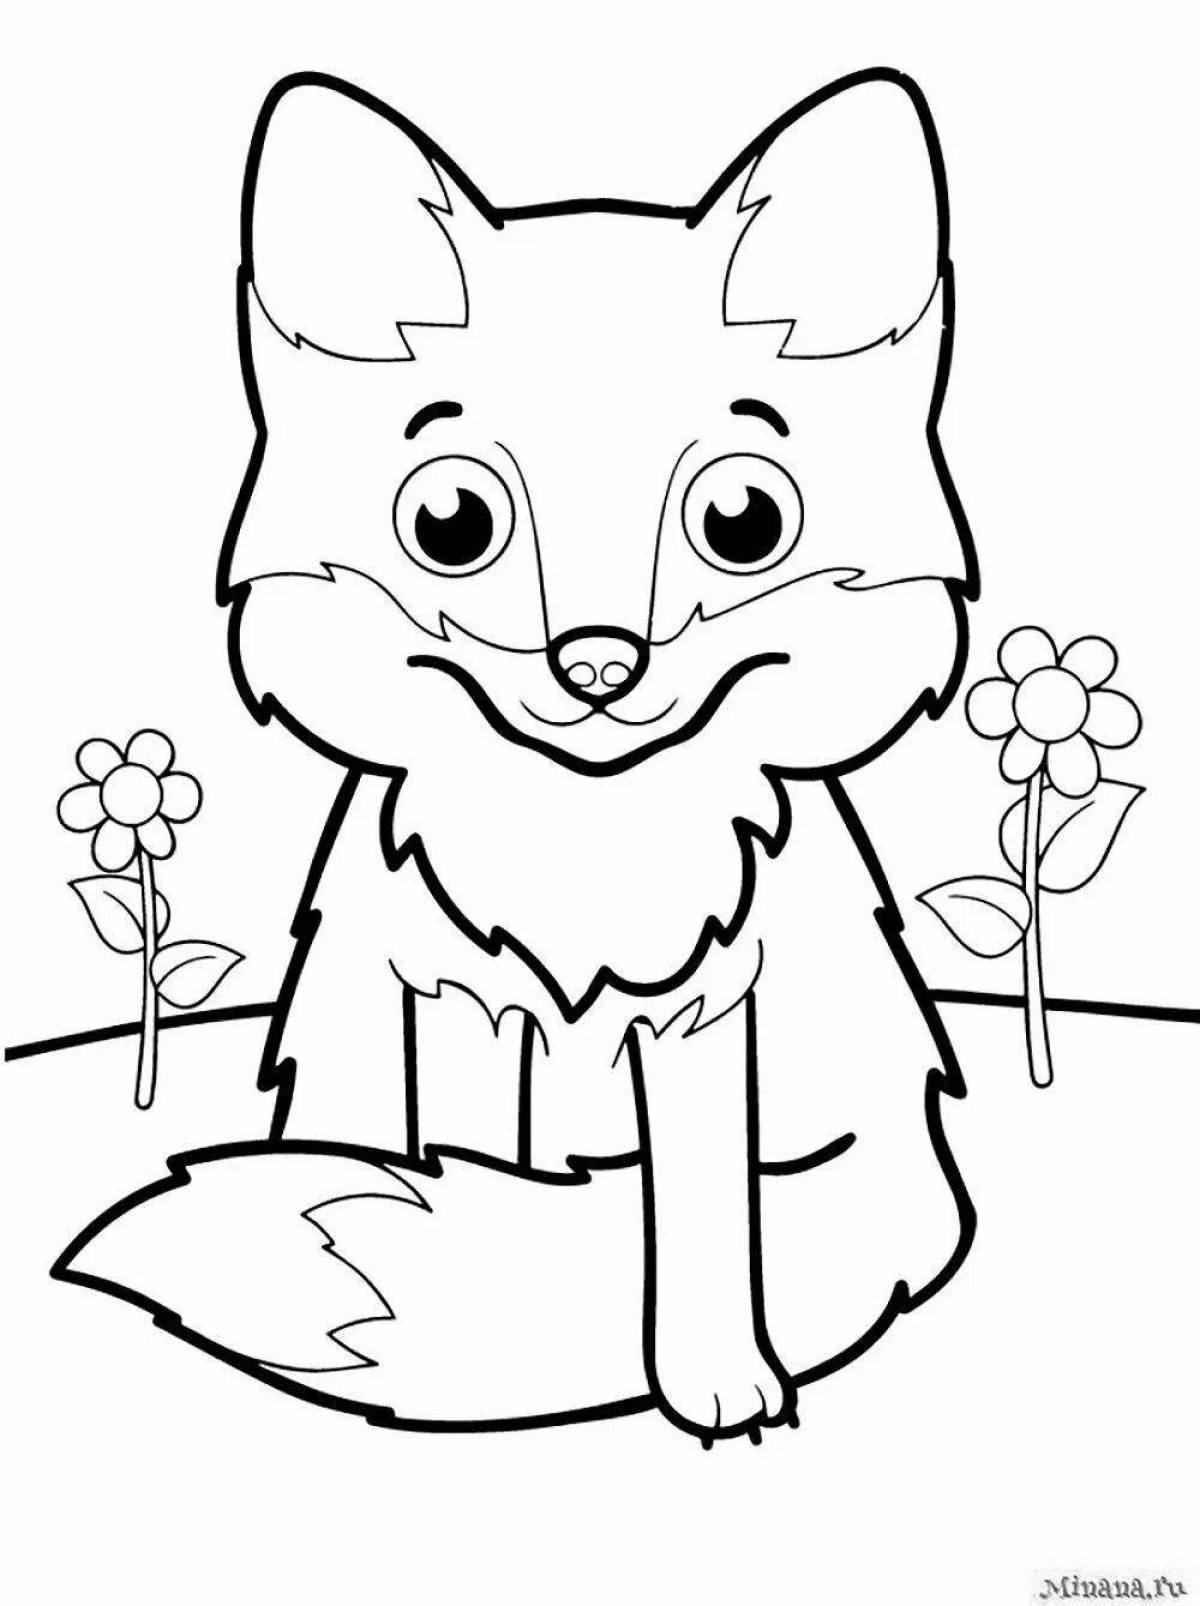 Sweet fox drawing for kids